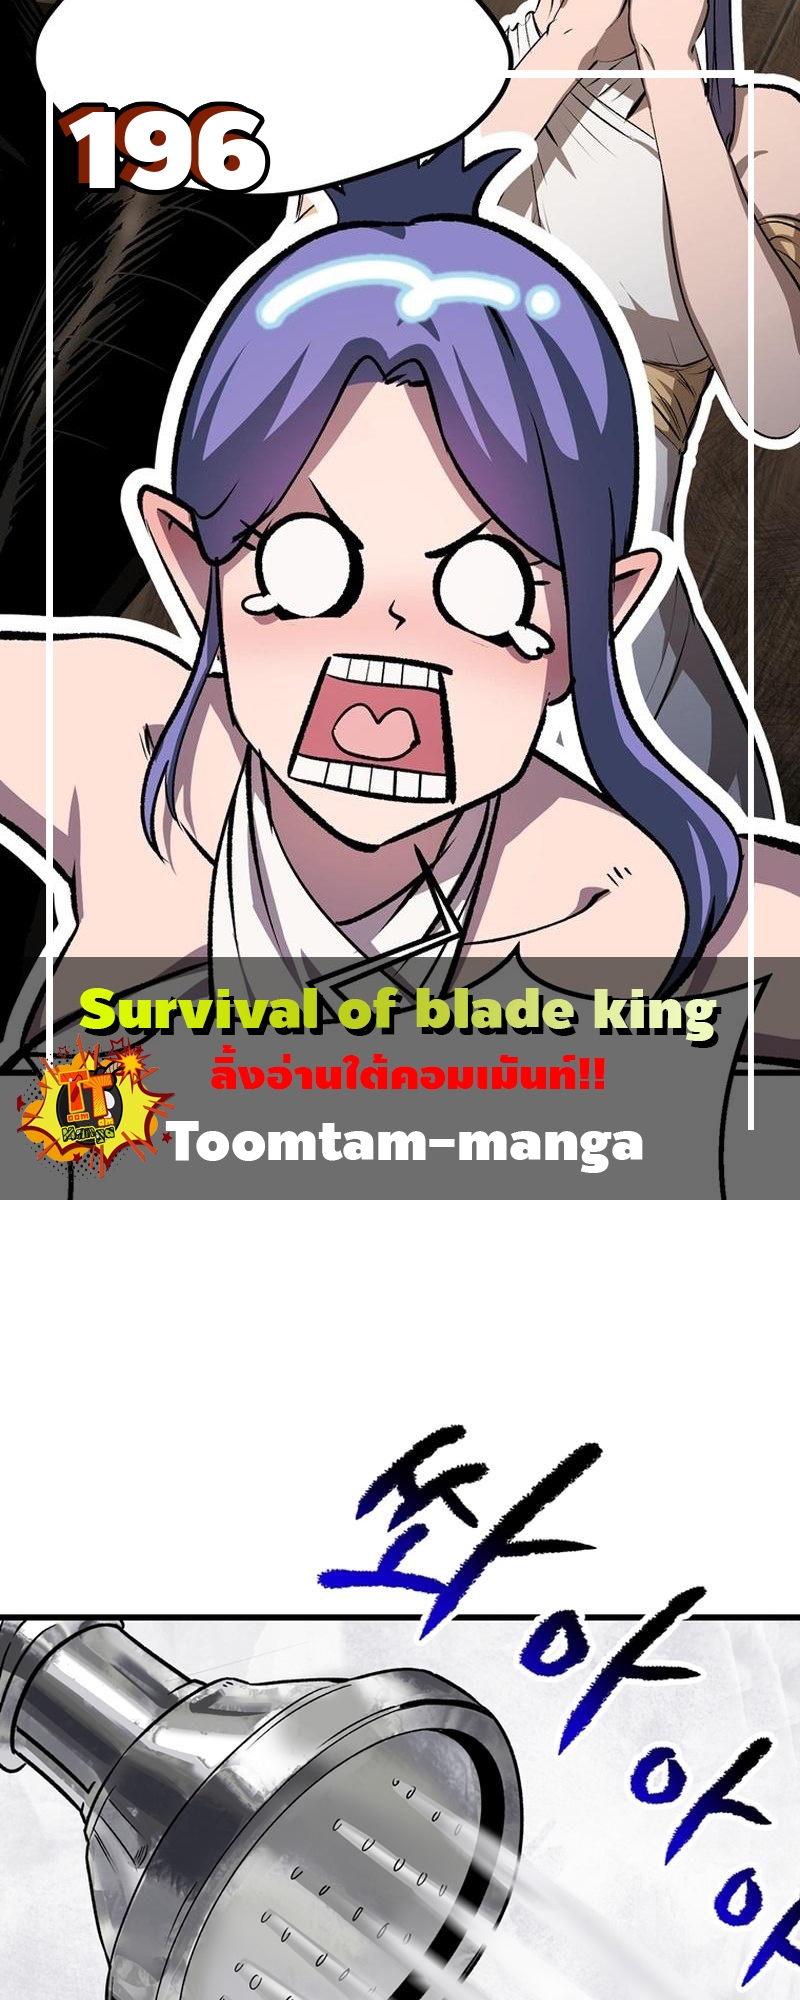 Survival of blade king 196 16 03 25670001